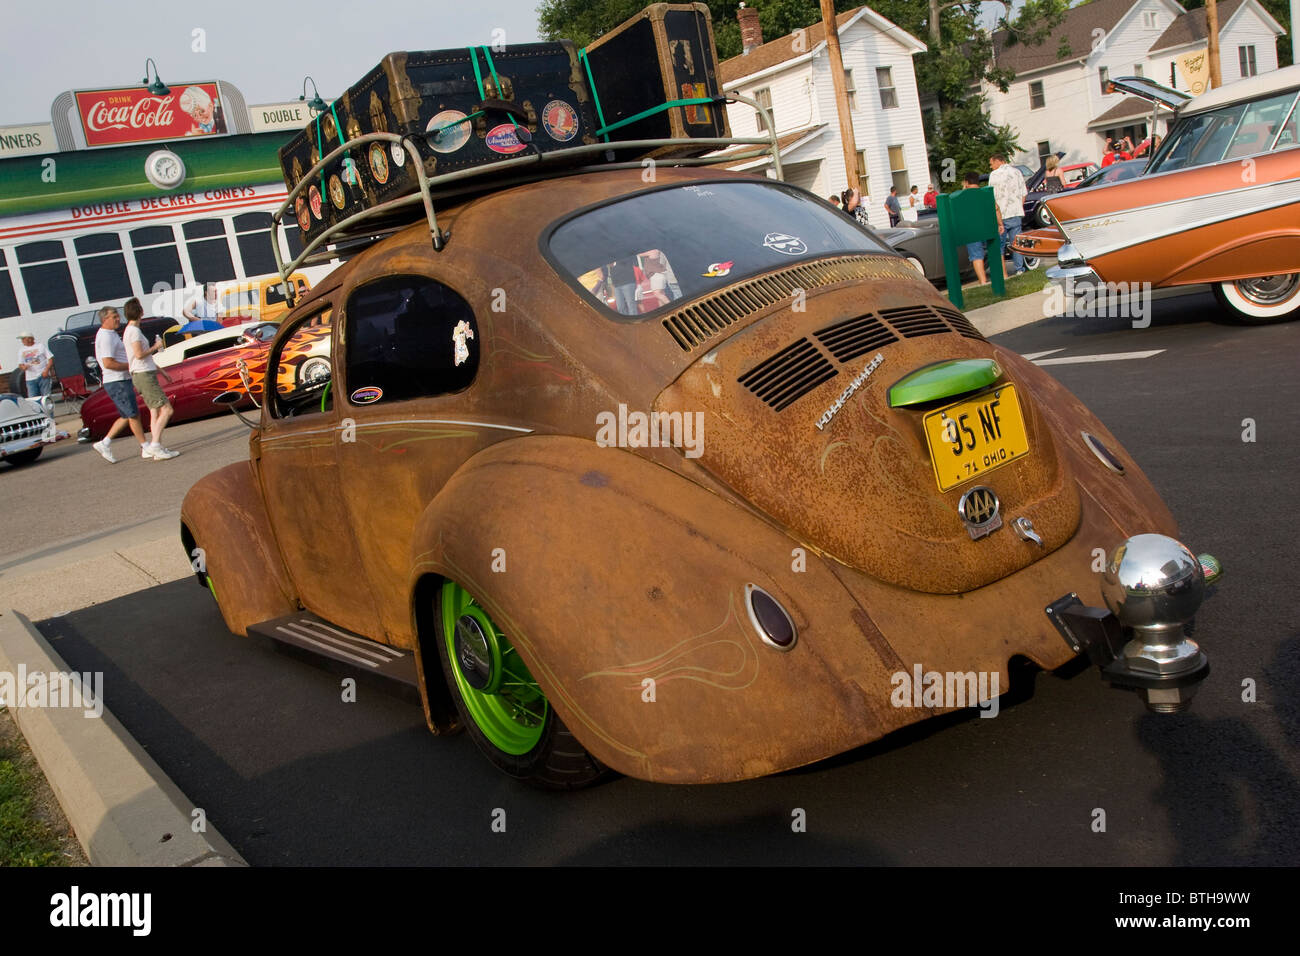 Auto- 1971 Volkswagon Beetle with modified shape, lots of rust, and extremely large trailer hitch. 95NF Stock Photo